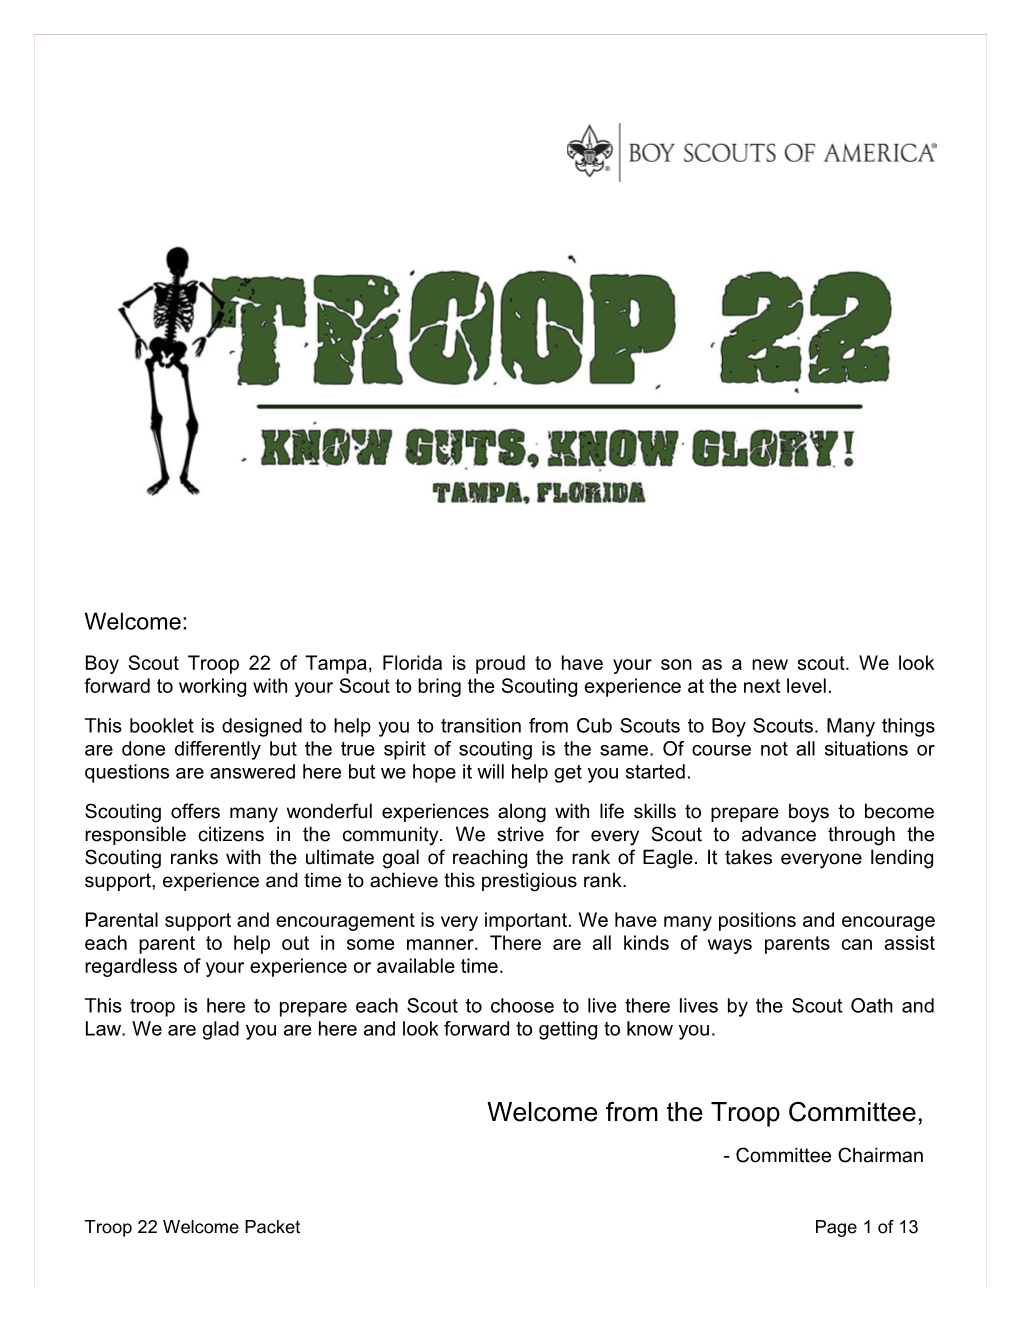 Boy Scout Troop 22 of Tampa, Florida Is Proud to Have Your Son As a New Scout. We Look